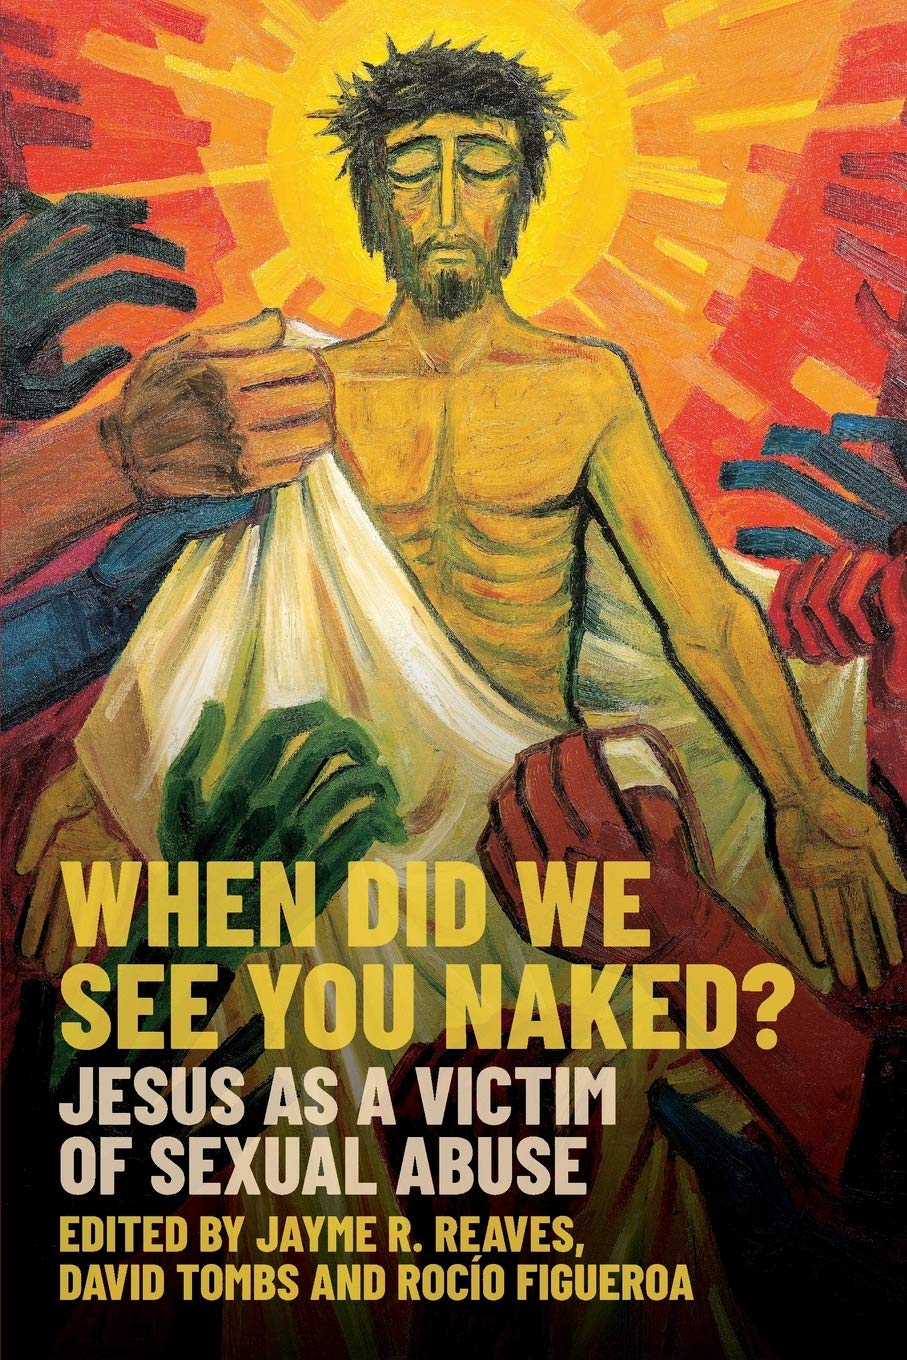 When Did We See You Naked? Jesus as a Victim of Sexual Abuse.